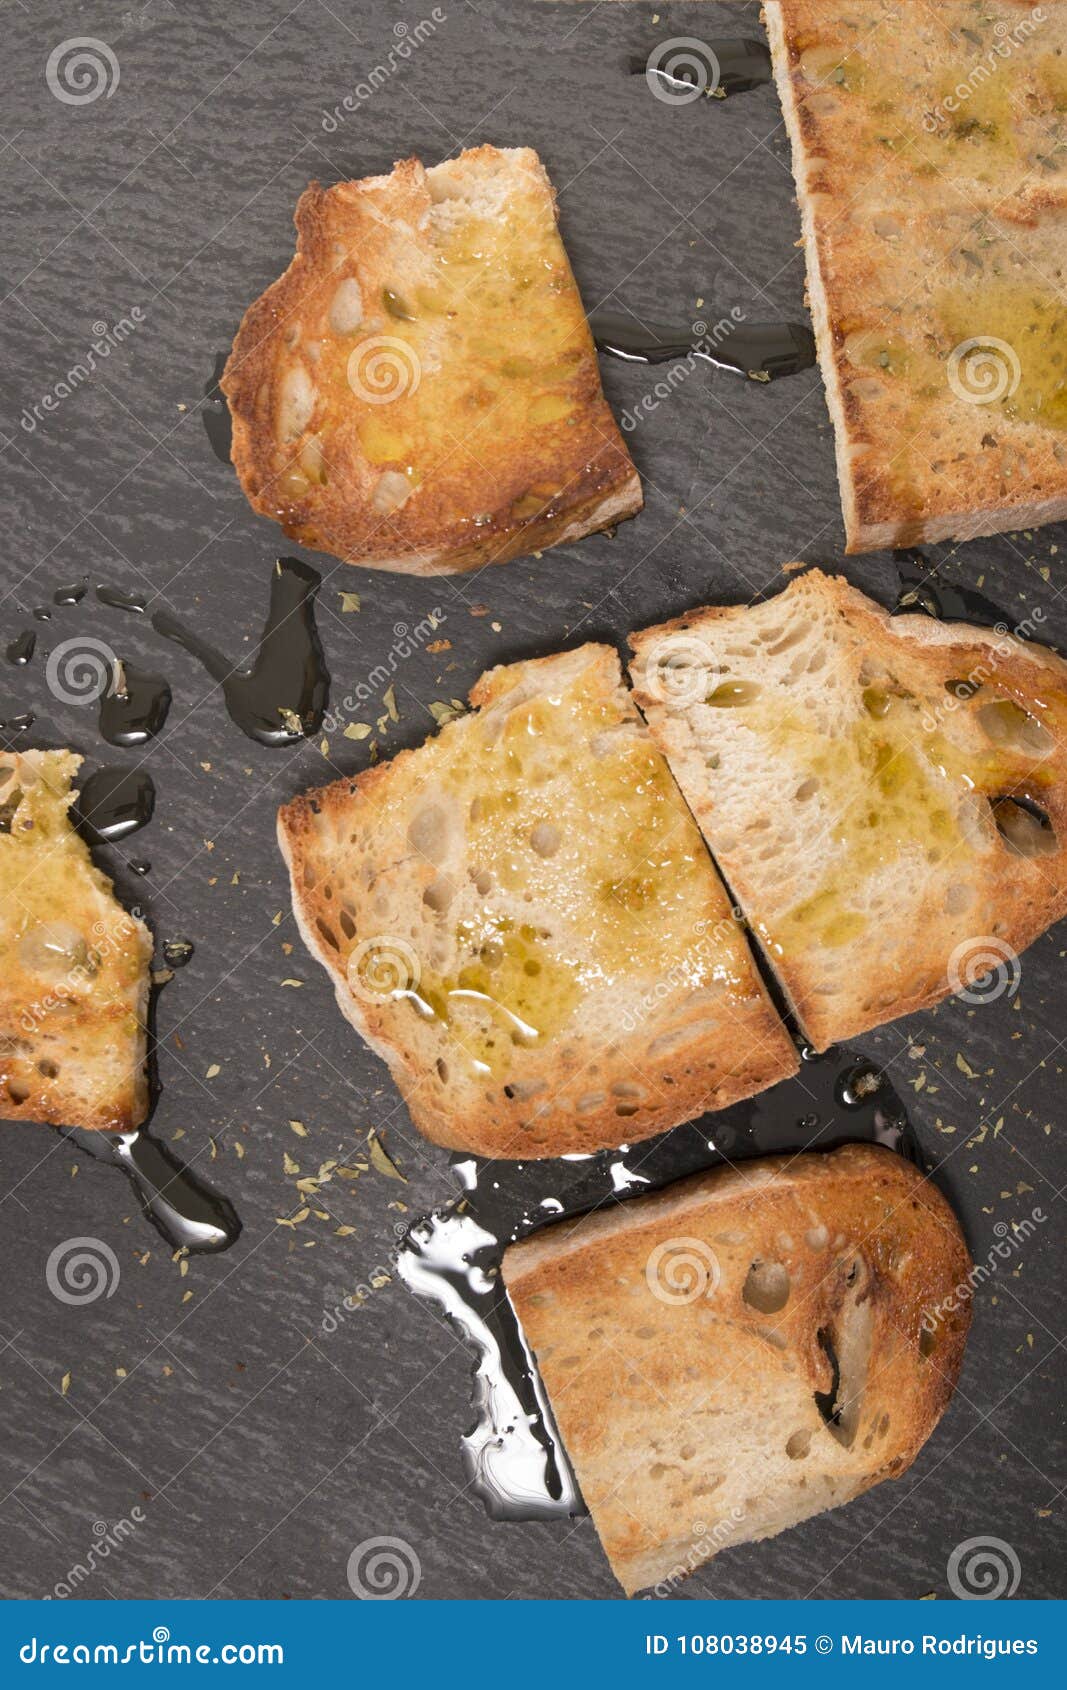 Toasted Bread with Olive Oil Stock Image - Image of shale, tasty: 108038945